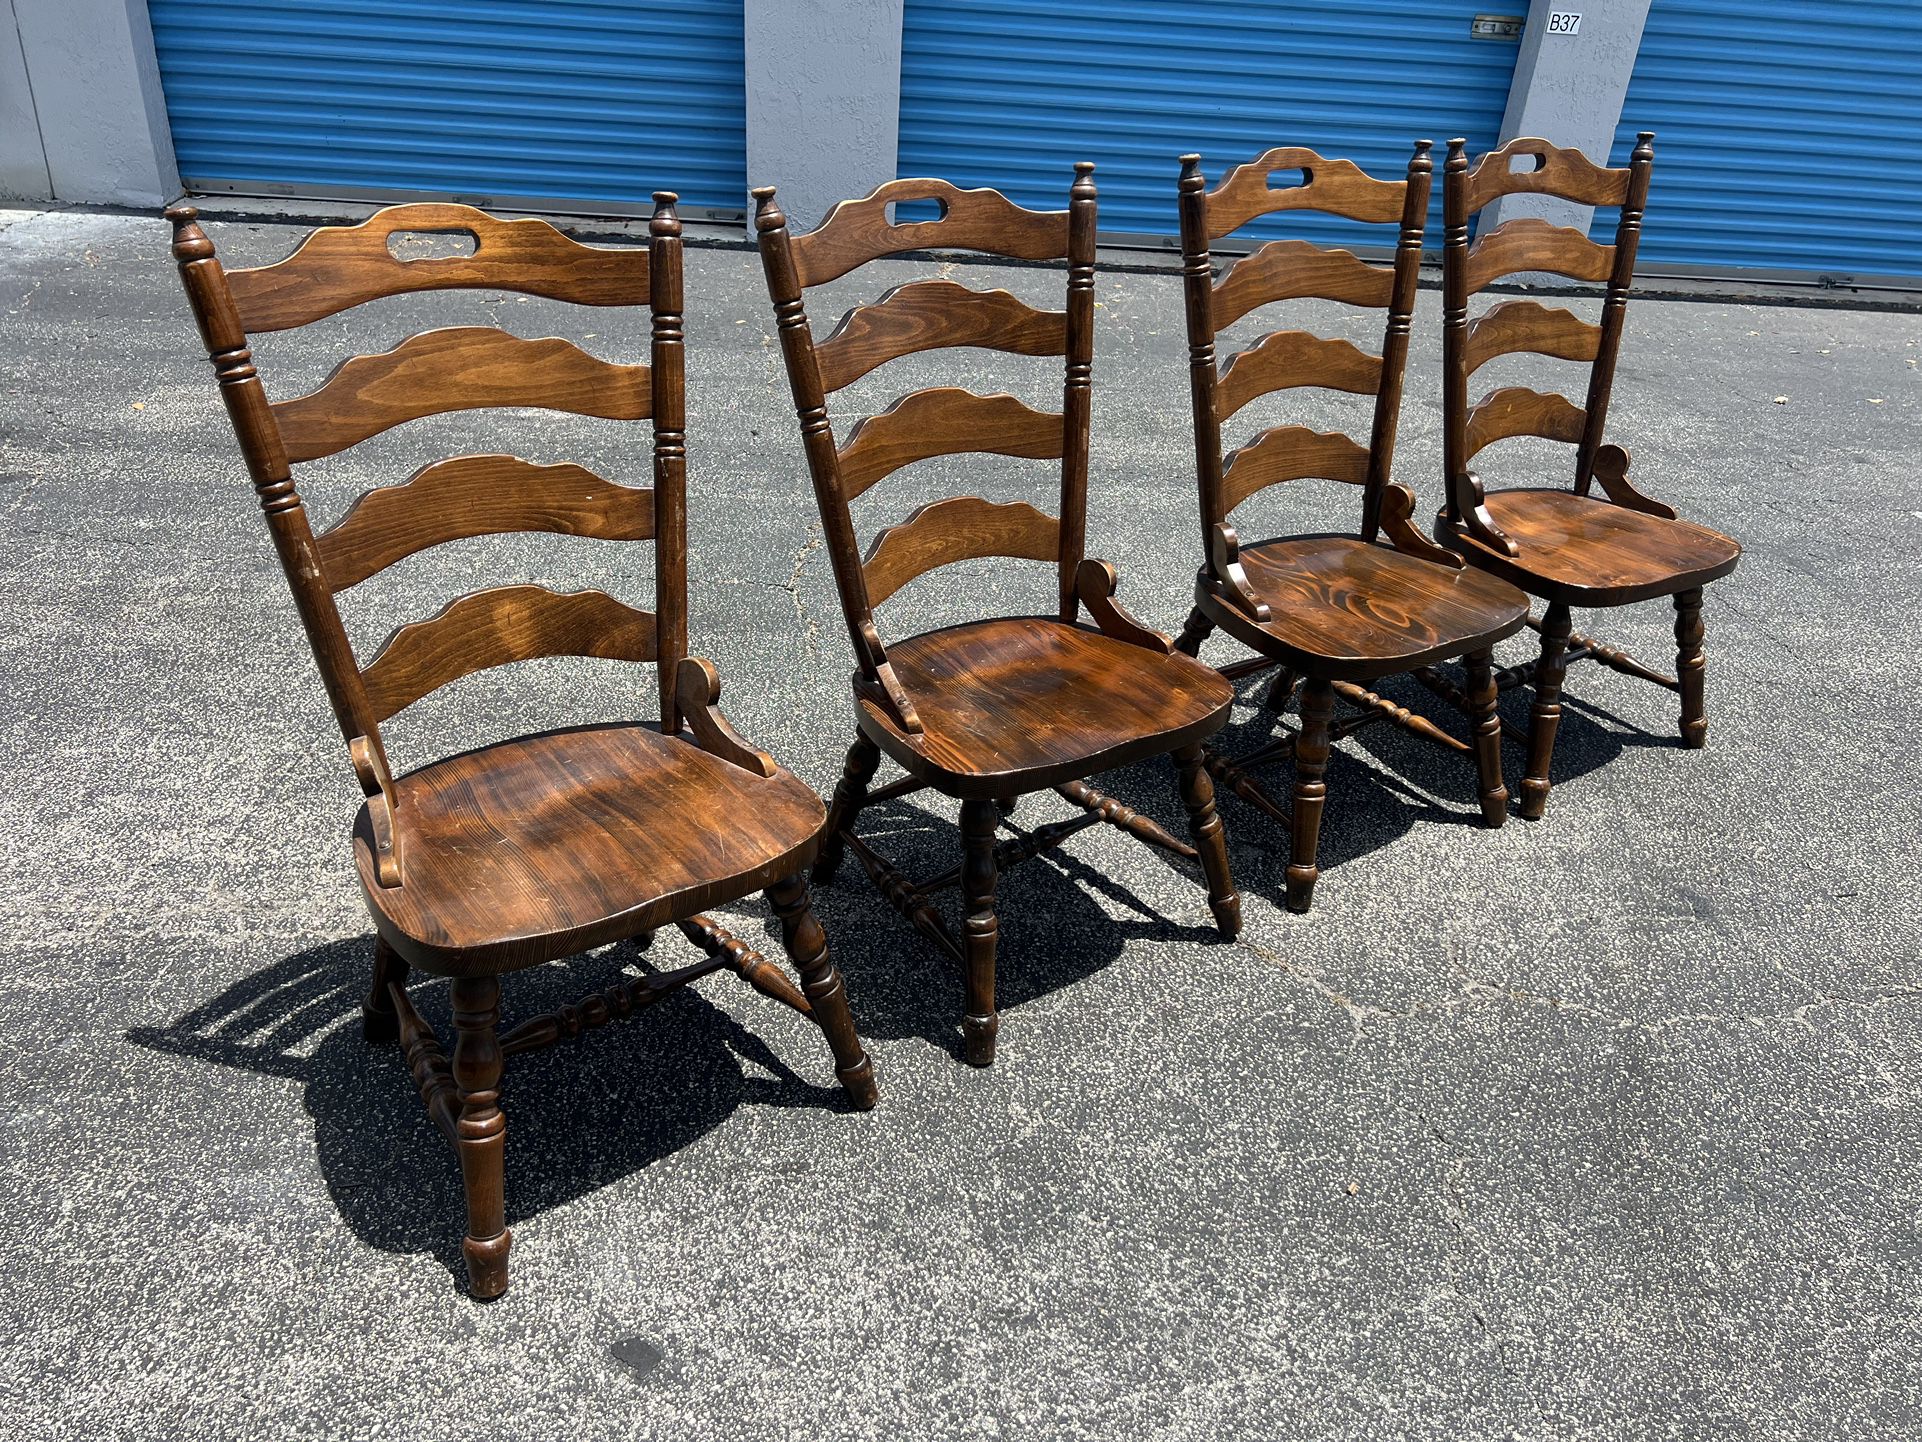 $100 for all 4! 4 RusticFarmhouse WoodenLadder BackChairs! Good condition!  21x29x44in SeatHeight 17in